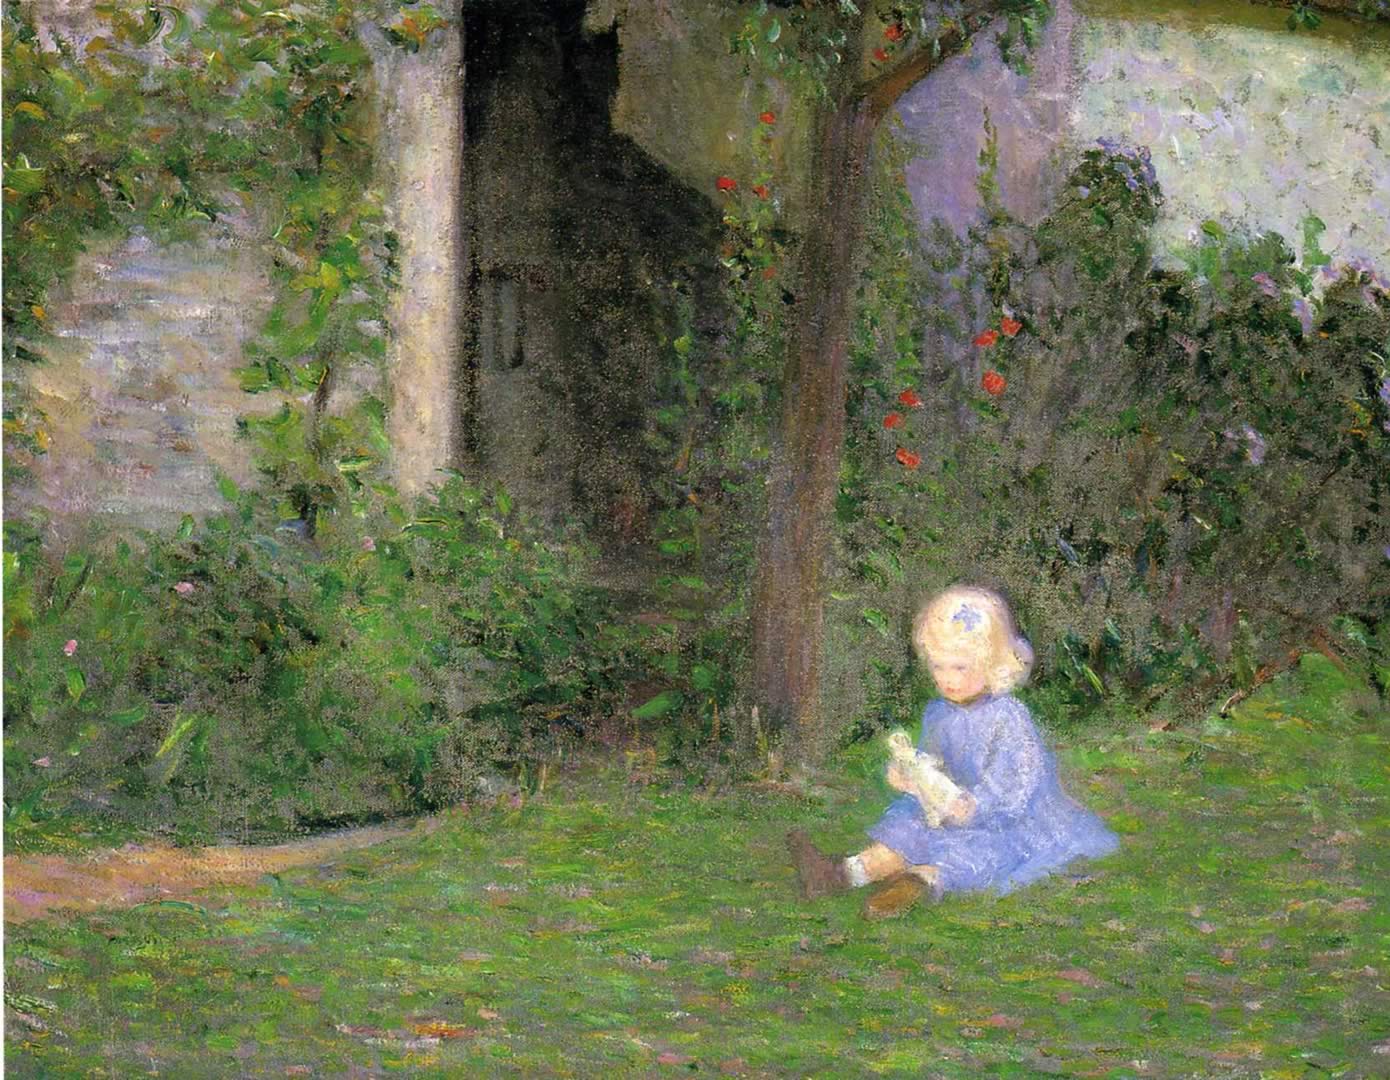  - child-in-a-walled-garden-giverny